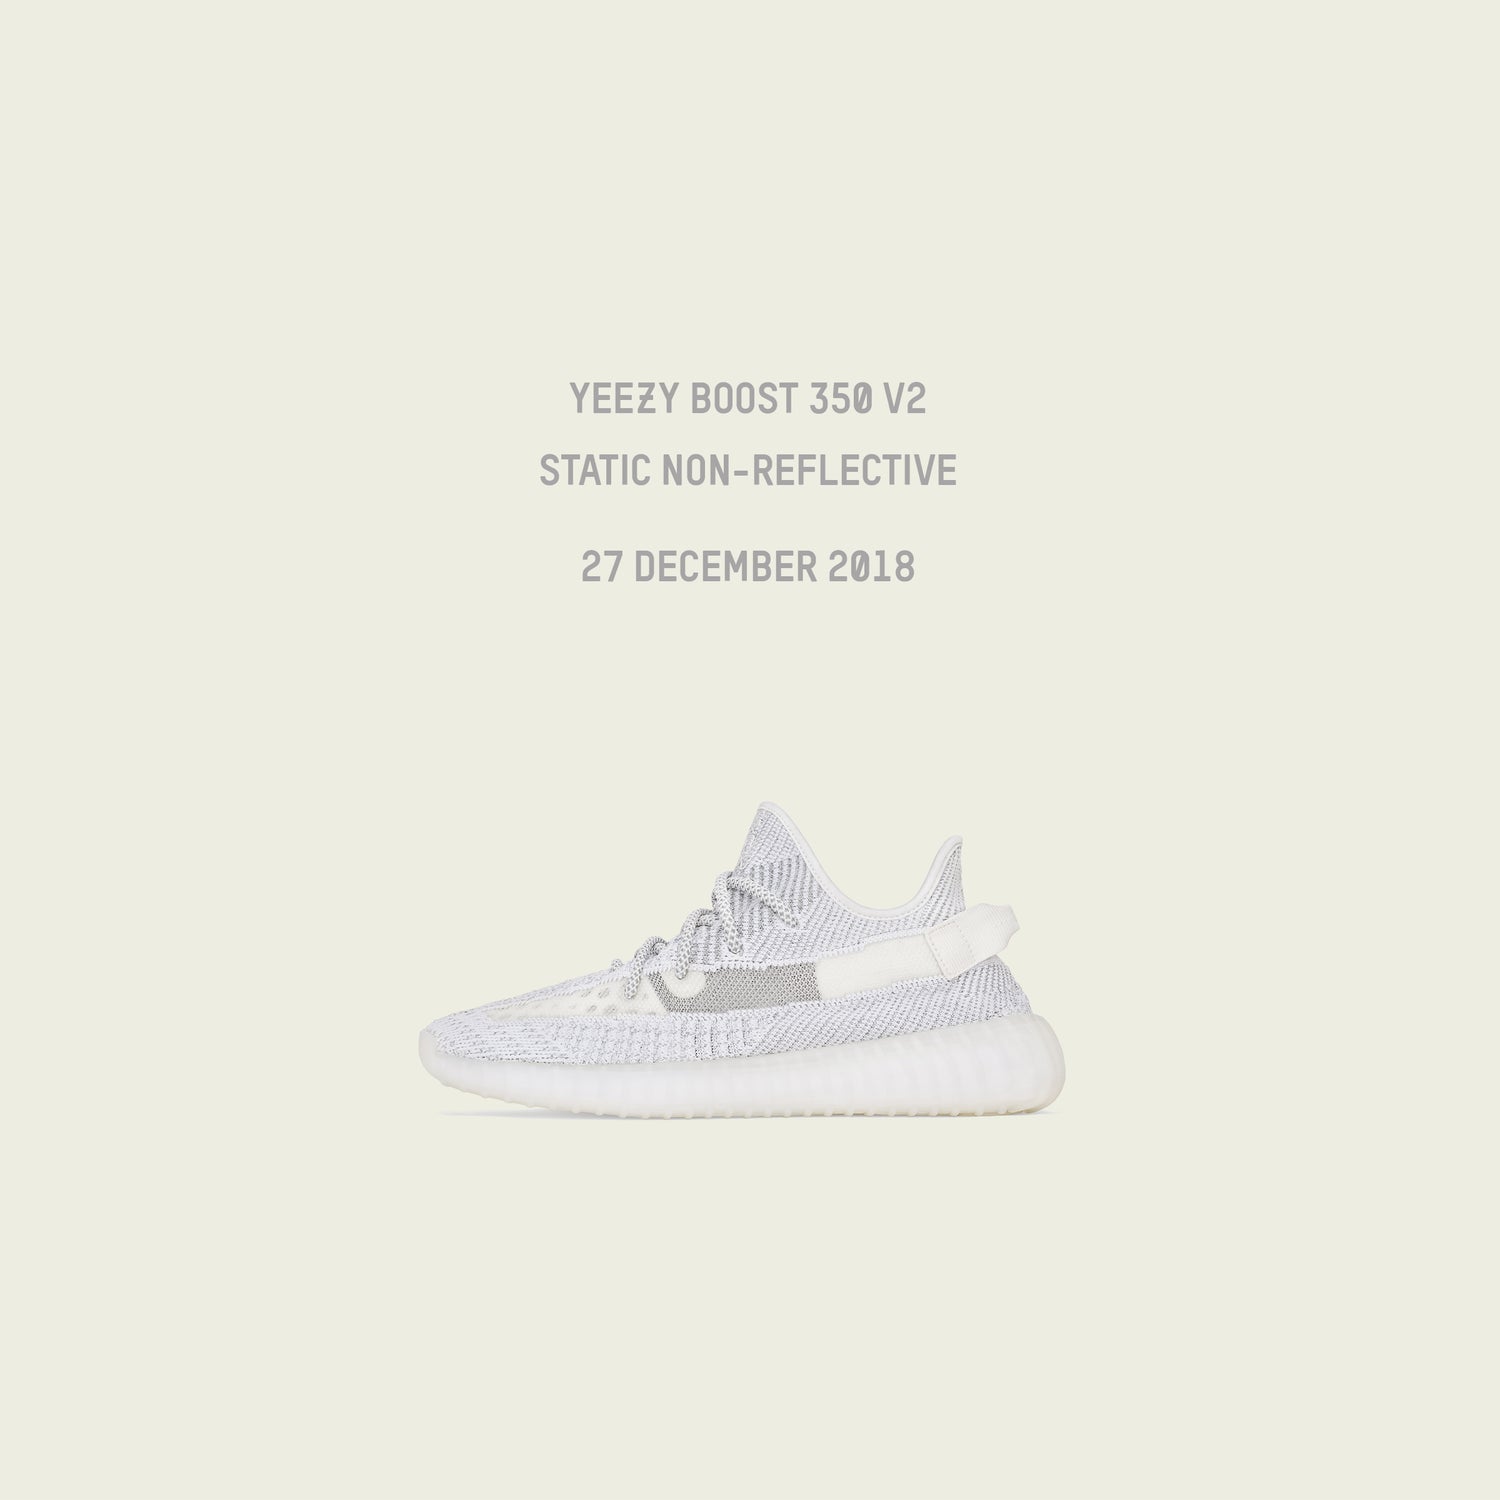 Yeezy Boost 350 V2 “Static Non-Reflective”